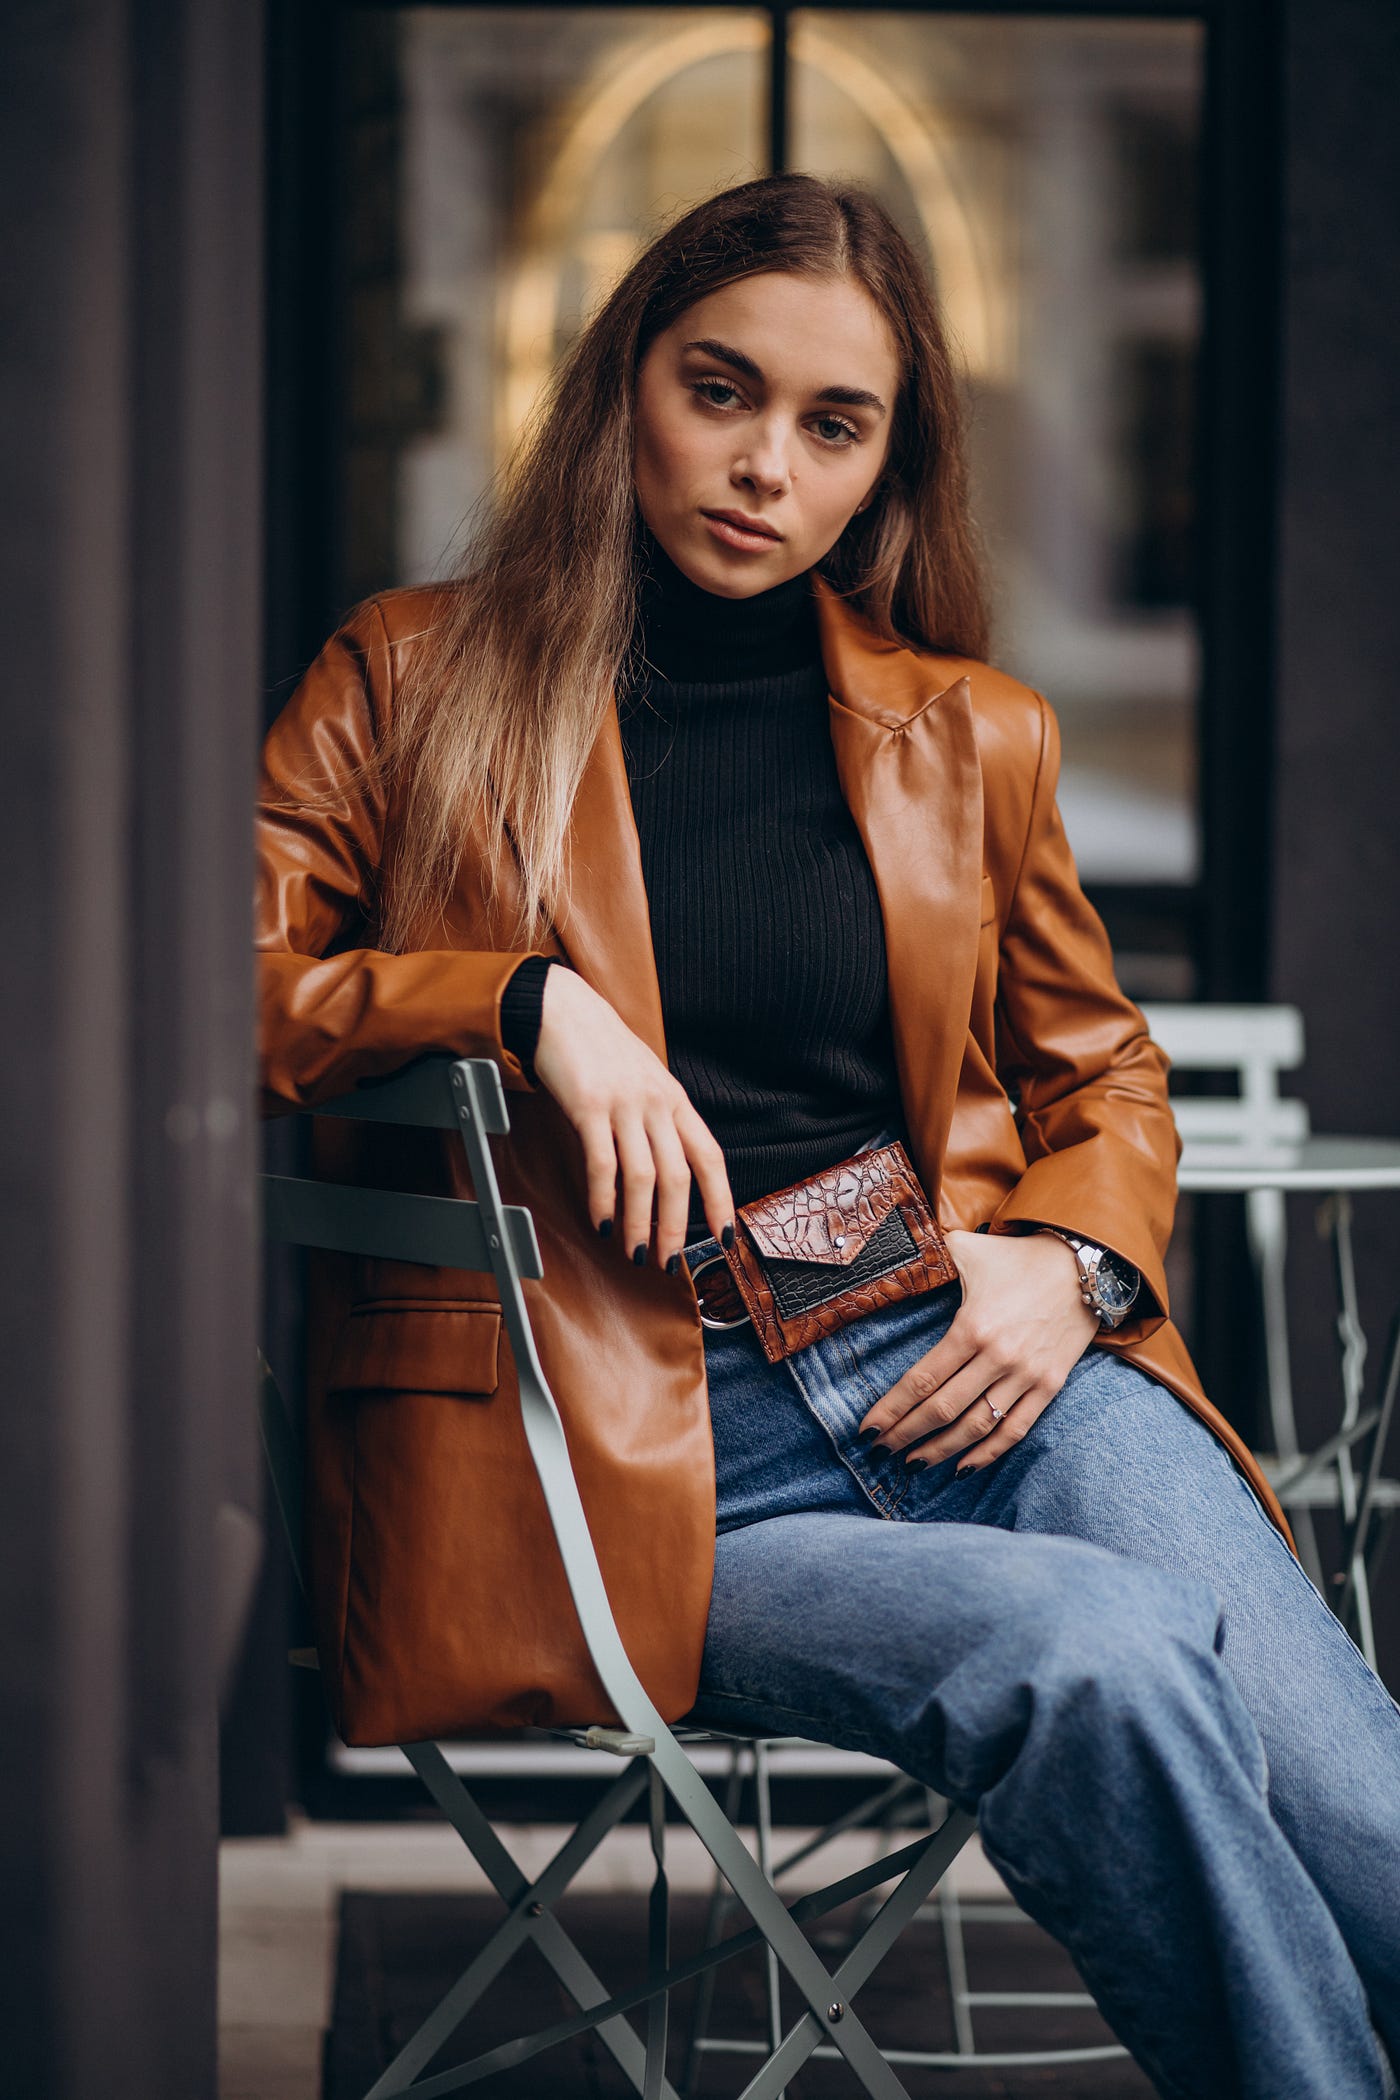 Cognac Leather Jackets: Timeless Elegance Your | Medium by Williamson in Kane | Wardrobe